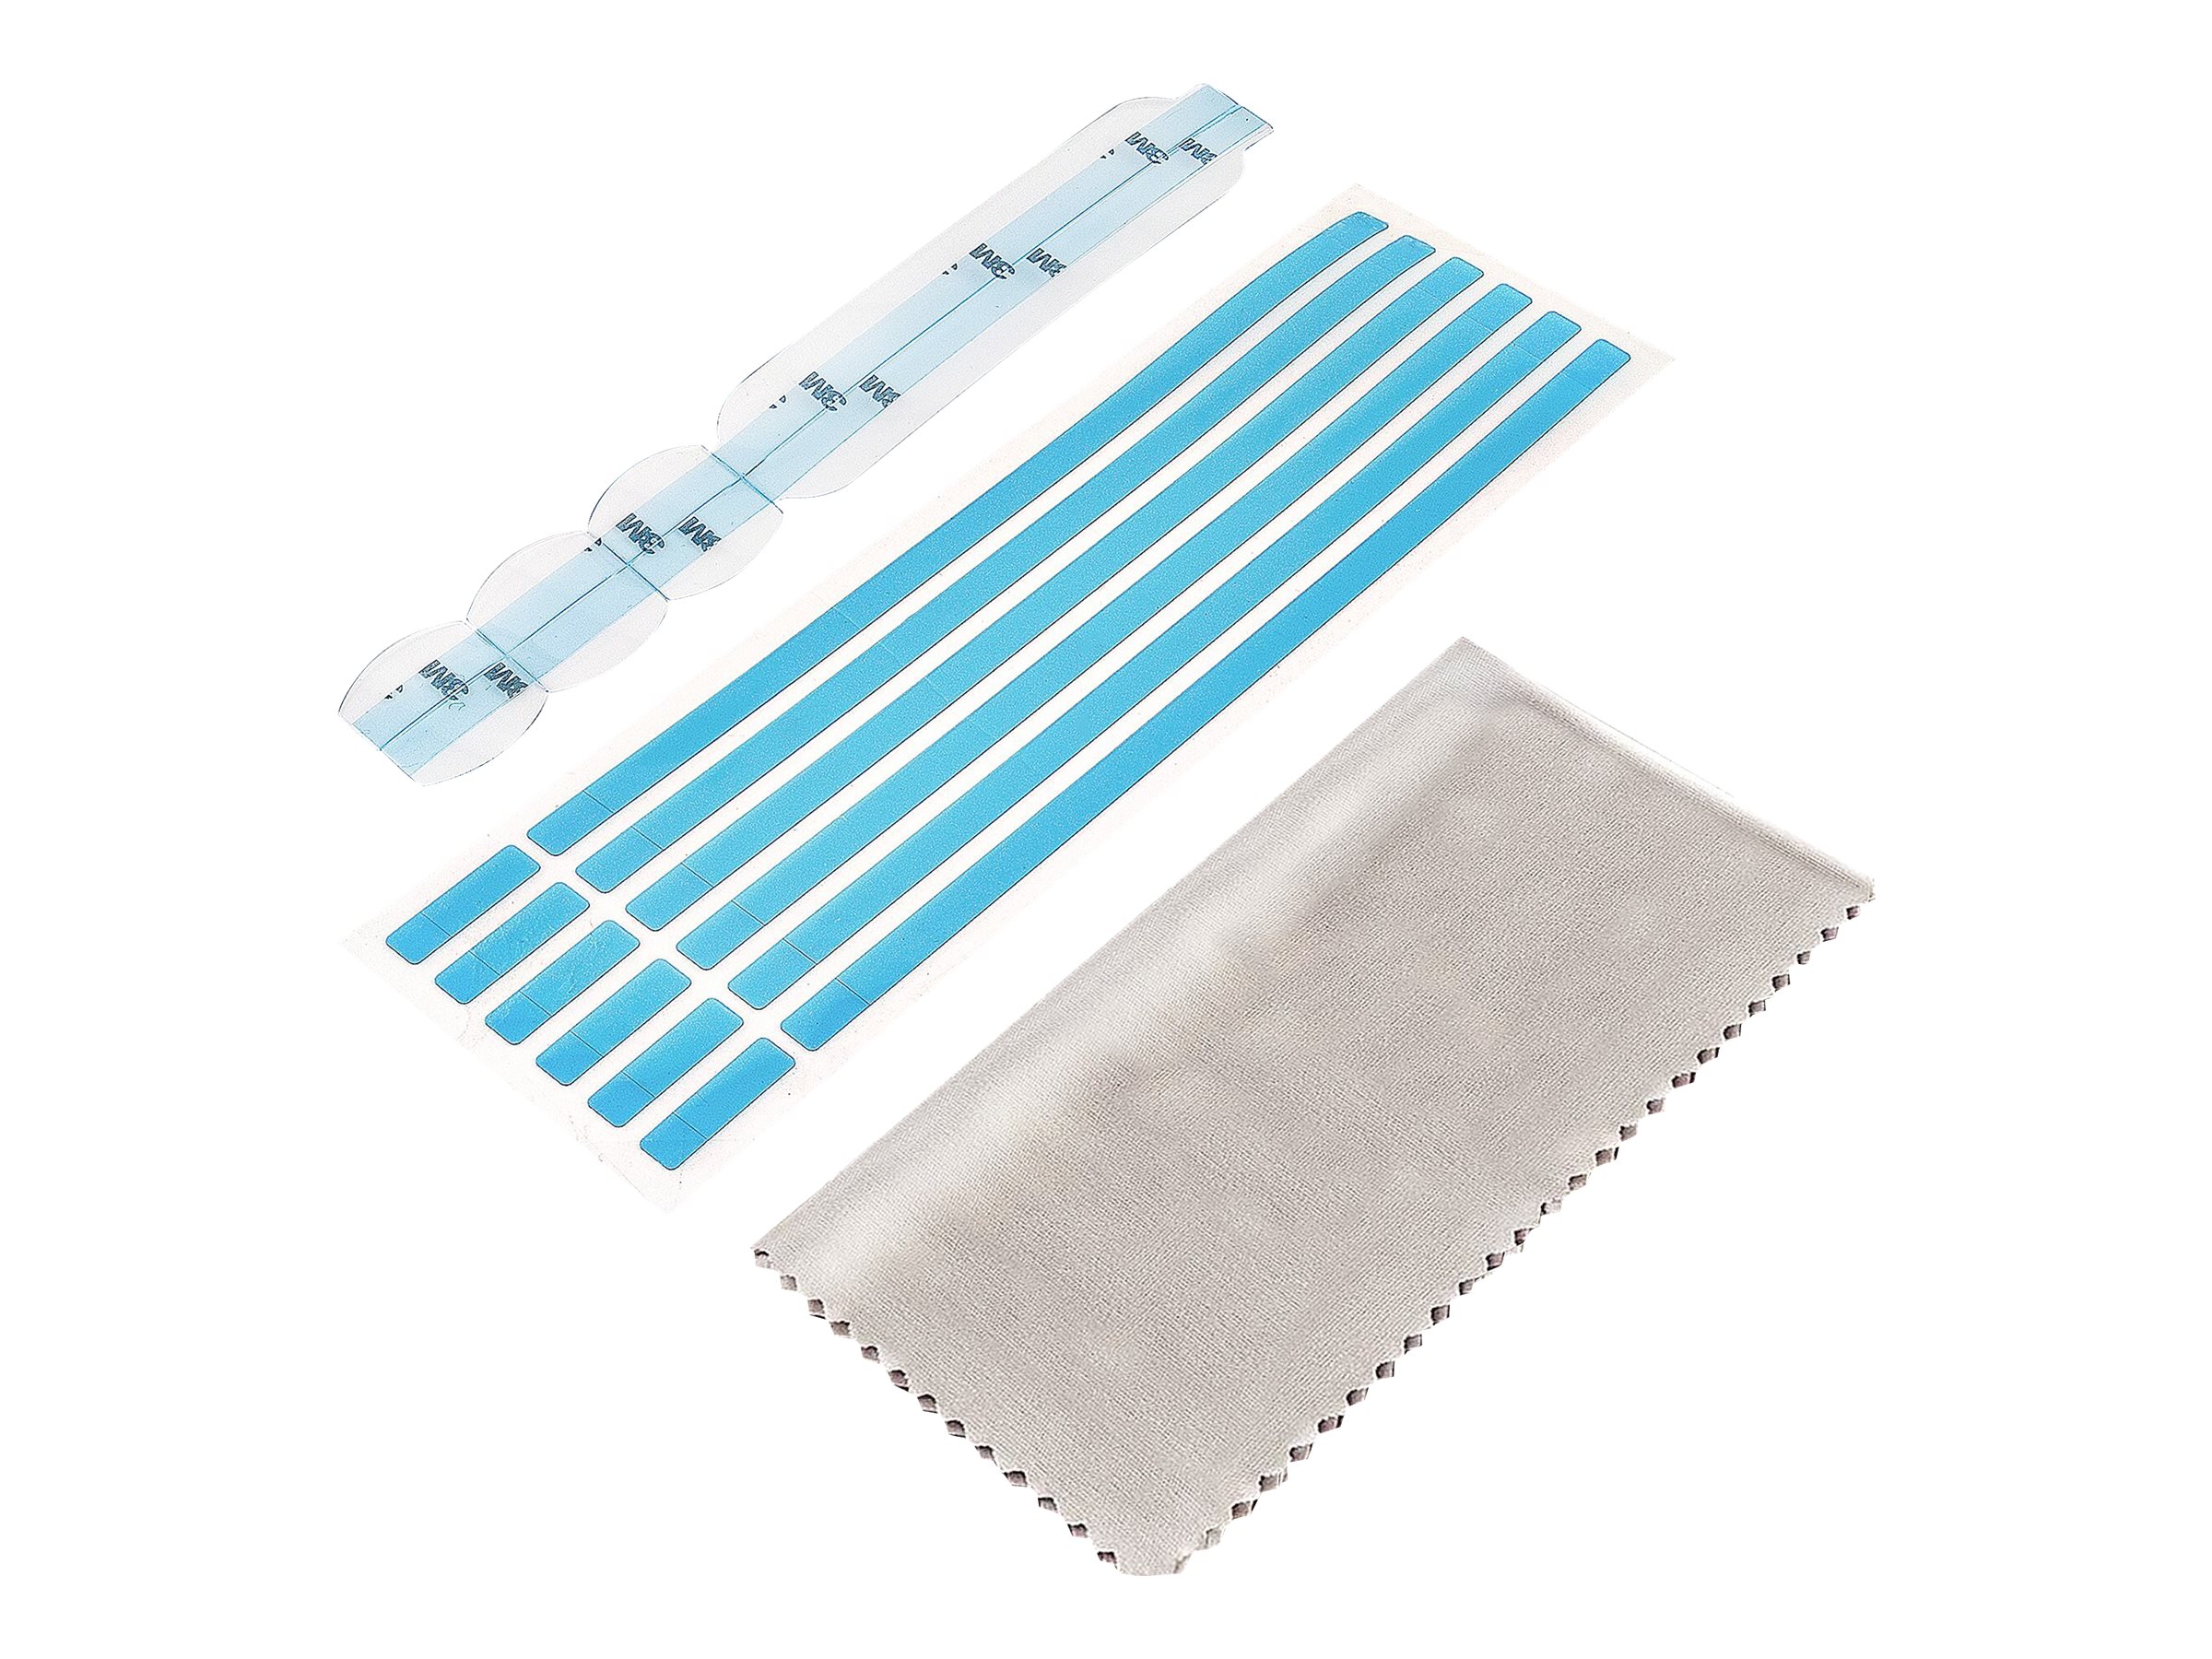 Privacy Screen Adhesive Strips and MountingTabs Installation Kit for Laptop/Computer Monitor Anti Glare Privacy Filters